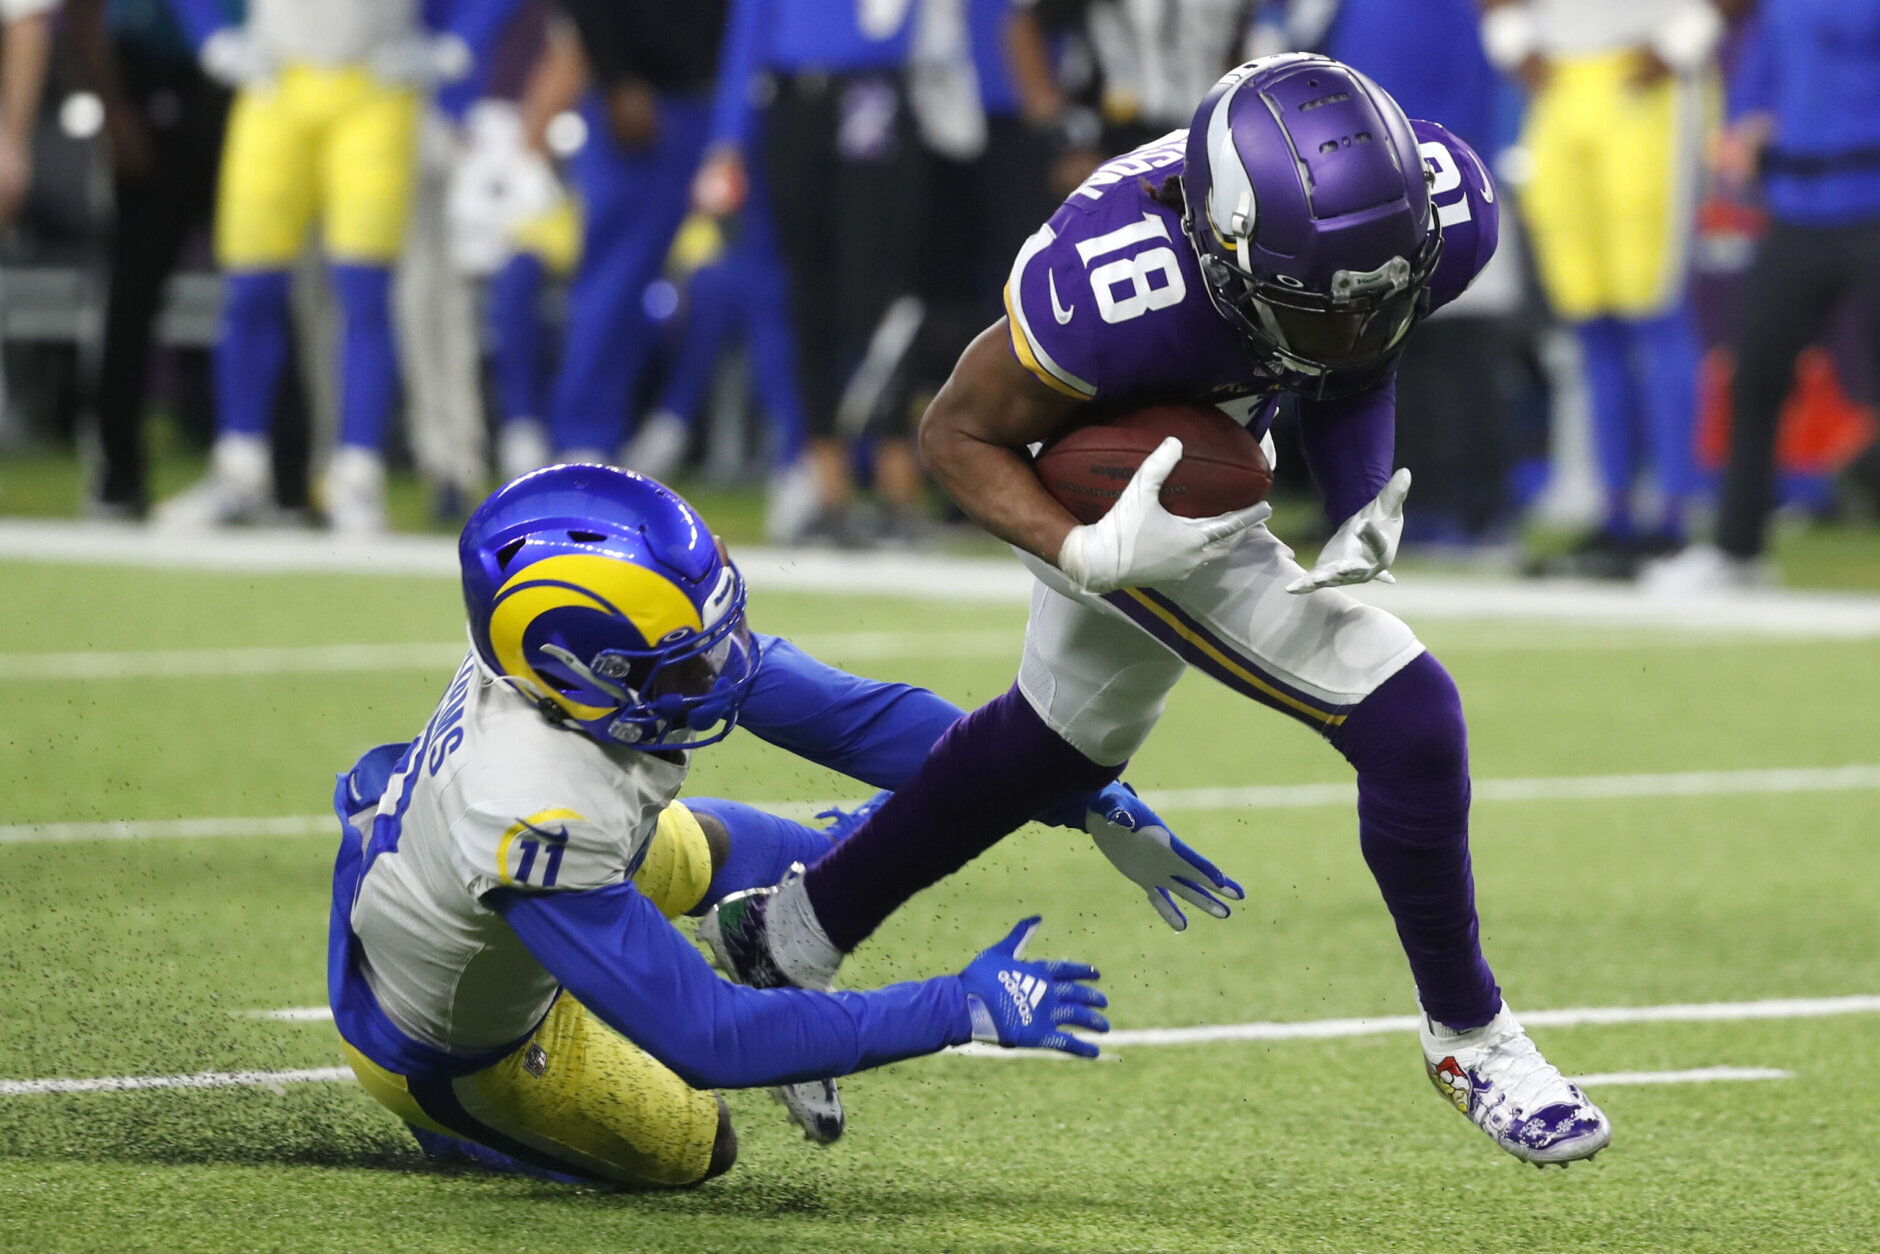 <p><em><strong>Rams 30</strong></em><br />
<em><strong>Vikings 23</strong></em></p>
<p>Forget the playoff implications here &#8230; watching Justin Jefferson <a href="https://www.espn.com/nfl/story/_/id/32941461/minnesota-vikings-justin-jefferson-breaks-record-receiving-yards-wr-first-two-nfl-seasons" target="_blank" rel="noopener">break Odell Beckham Jr.&#8217;s record right in front of him</a> and then <a href="https://www.skornorth.com/zulgad-flat-out-inexcusable-justin-jeffersons-assessment-serves-as-indictment-of-vikings/" target="_blank" rel="noopener">sound off on what&#8217;s wrong with Minnesota</a> is peak 2021 on its way out.</p>
